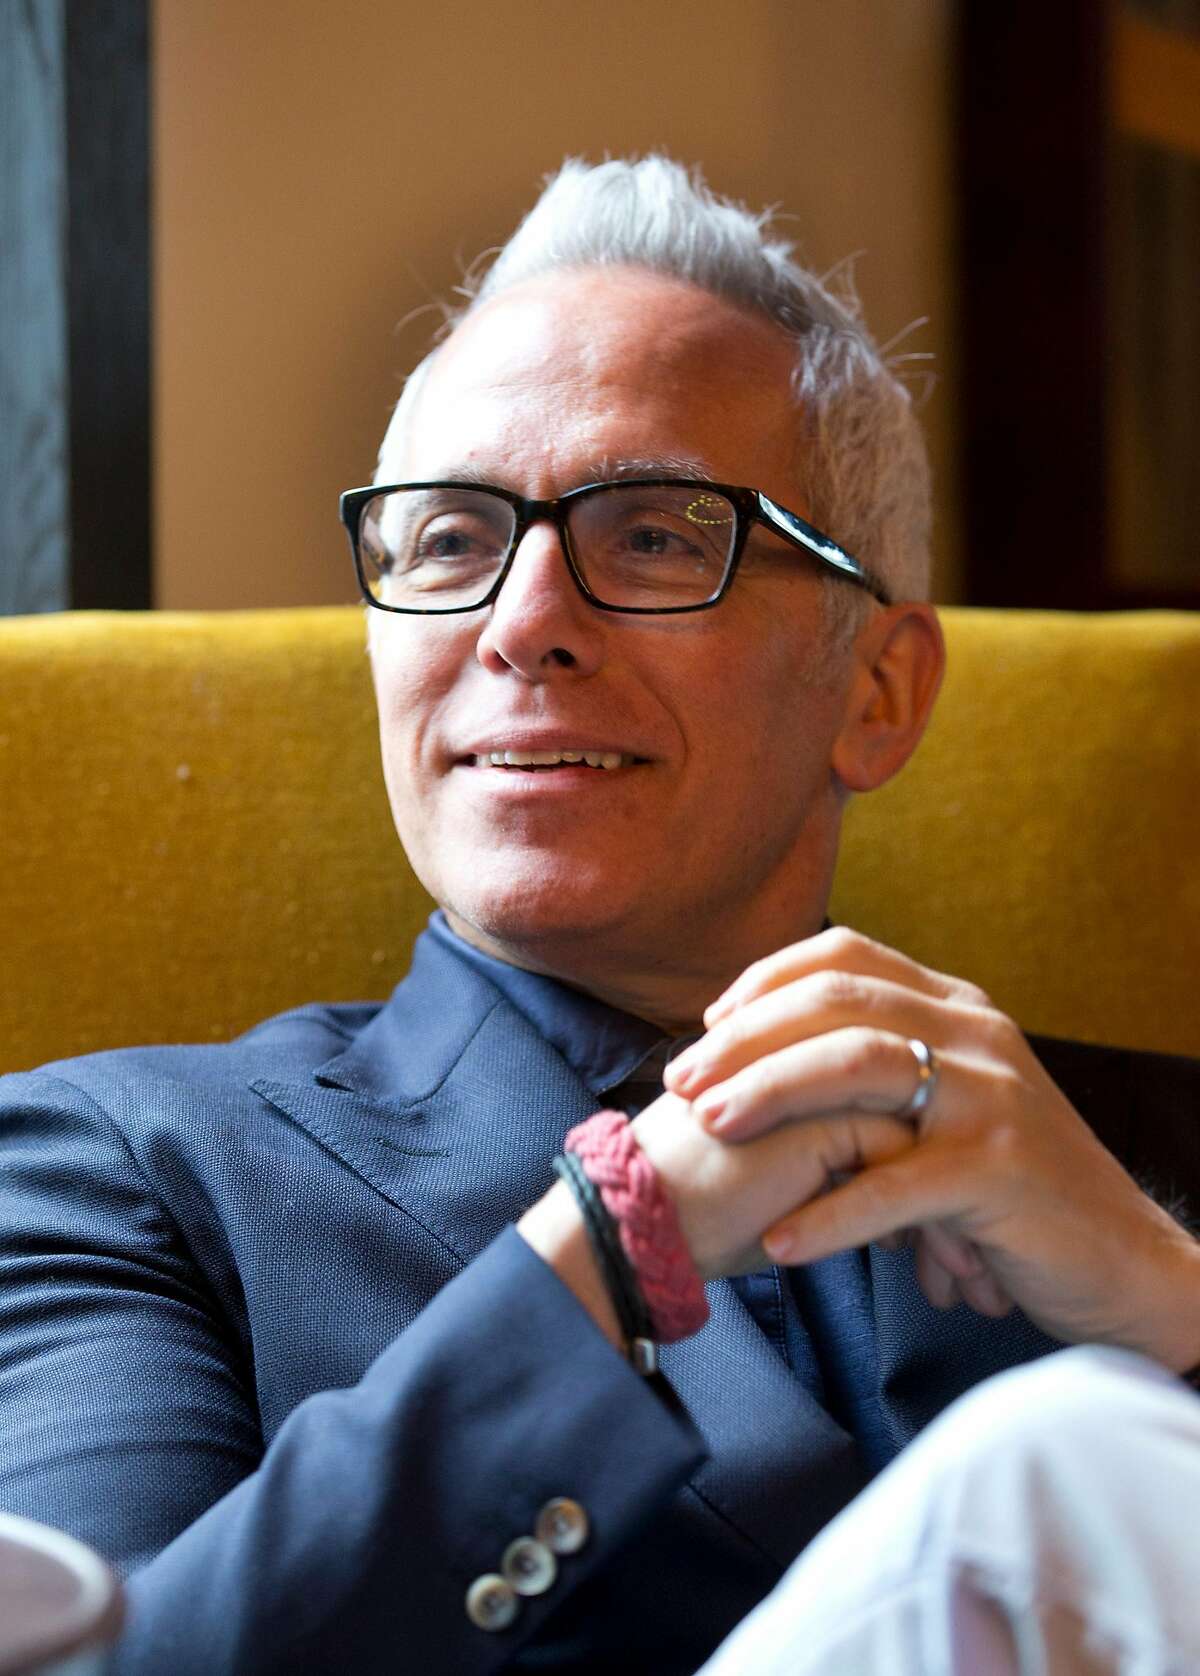 Chef Geoffrey Zakarian listens to a question during an interview with The Associated Press, Friday, Feb. 20, 2015, in Miami Beach, Fla. Now honored with an Iron Chef title, a judging seat on "Chopped" and a best-selling cookbook, Zakarian says opening a restaurant is a lot like playing poker. "It's a crap shoot. We gamble when we open a restaurant," said Zakarian, whose restaurants include The Lambs Club and The National. (AP Photo/Wilfredo Lee)